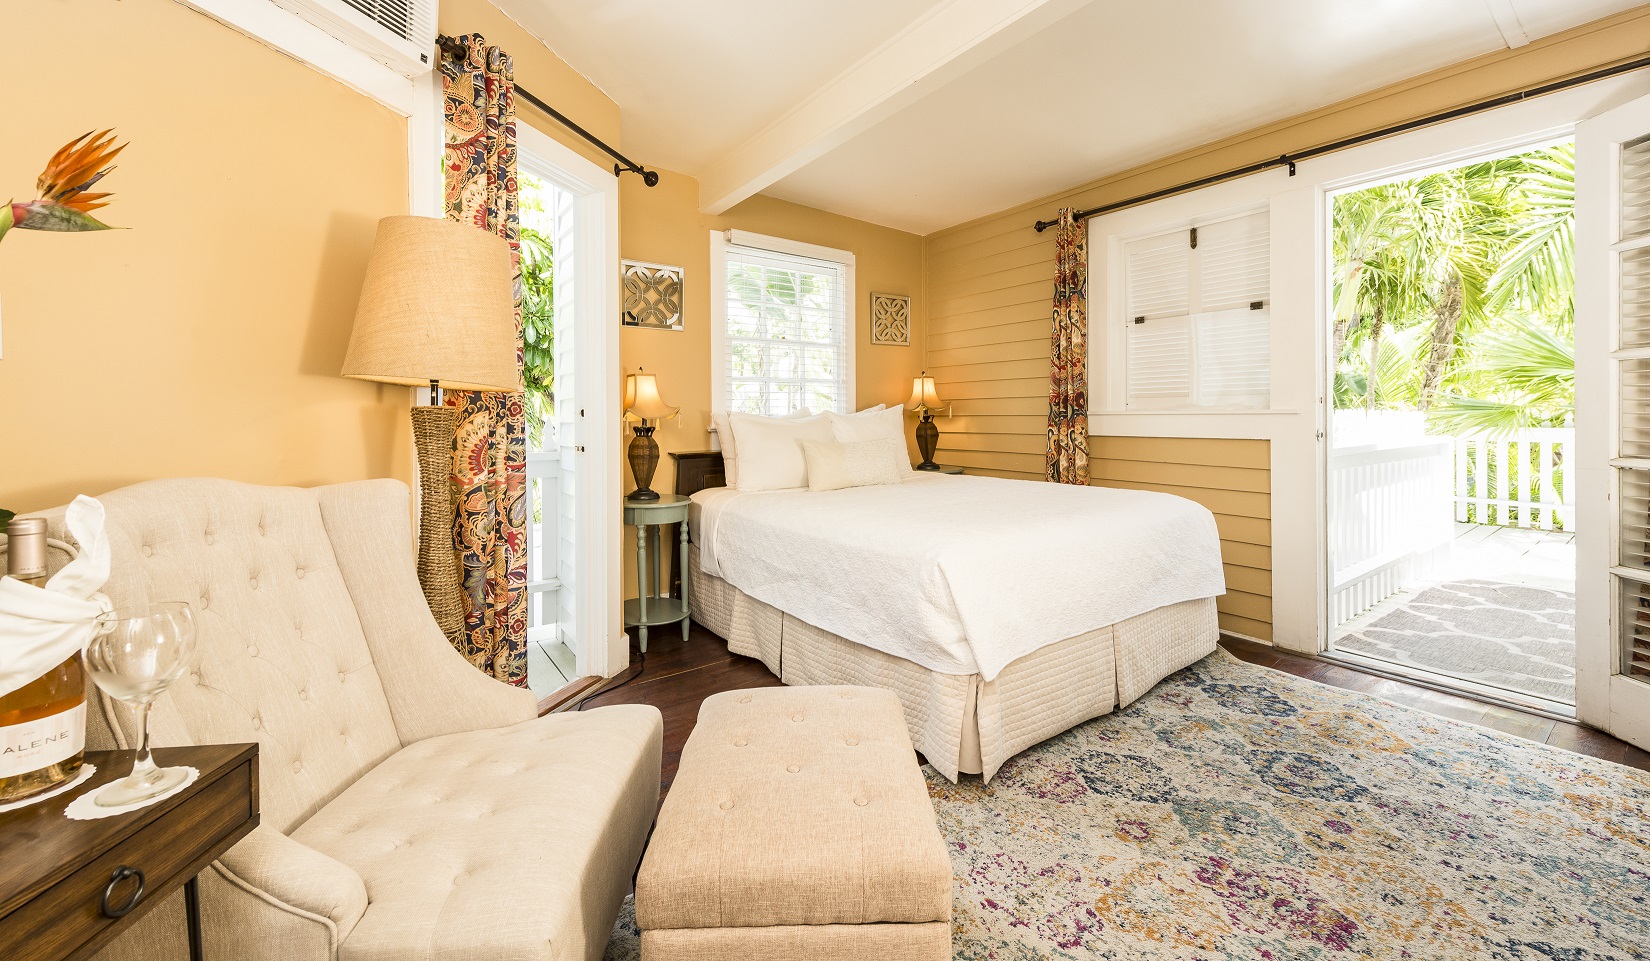 Romantic Key West Getaway - Sunset Room at Old Town Manor